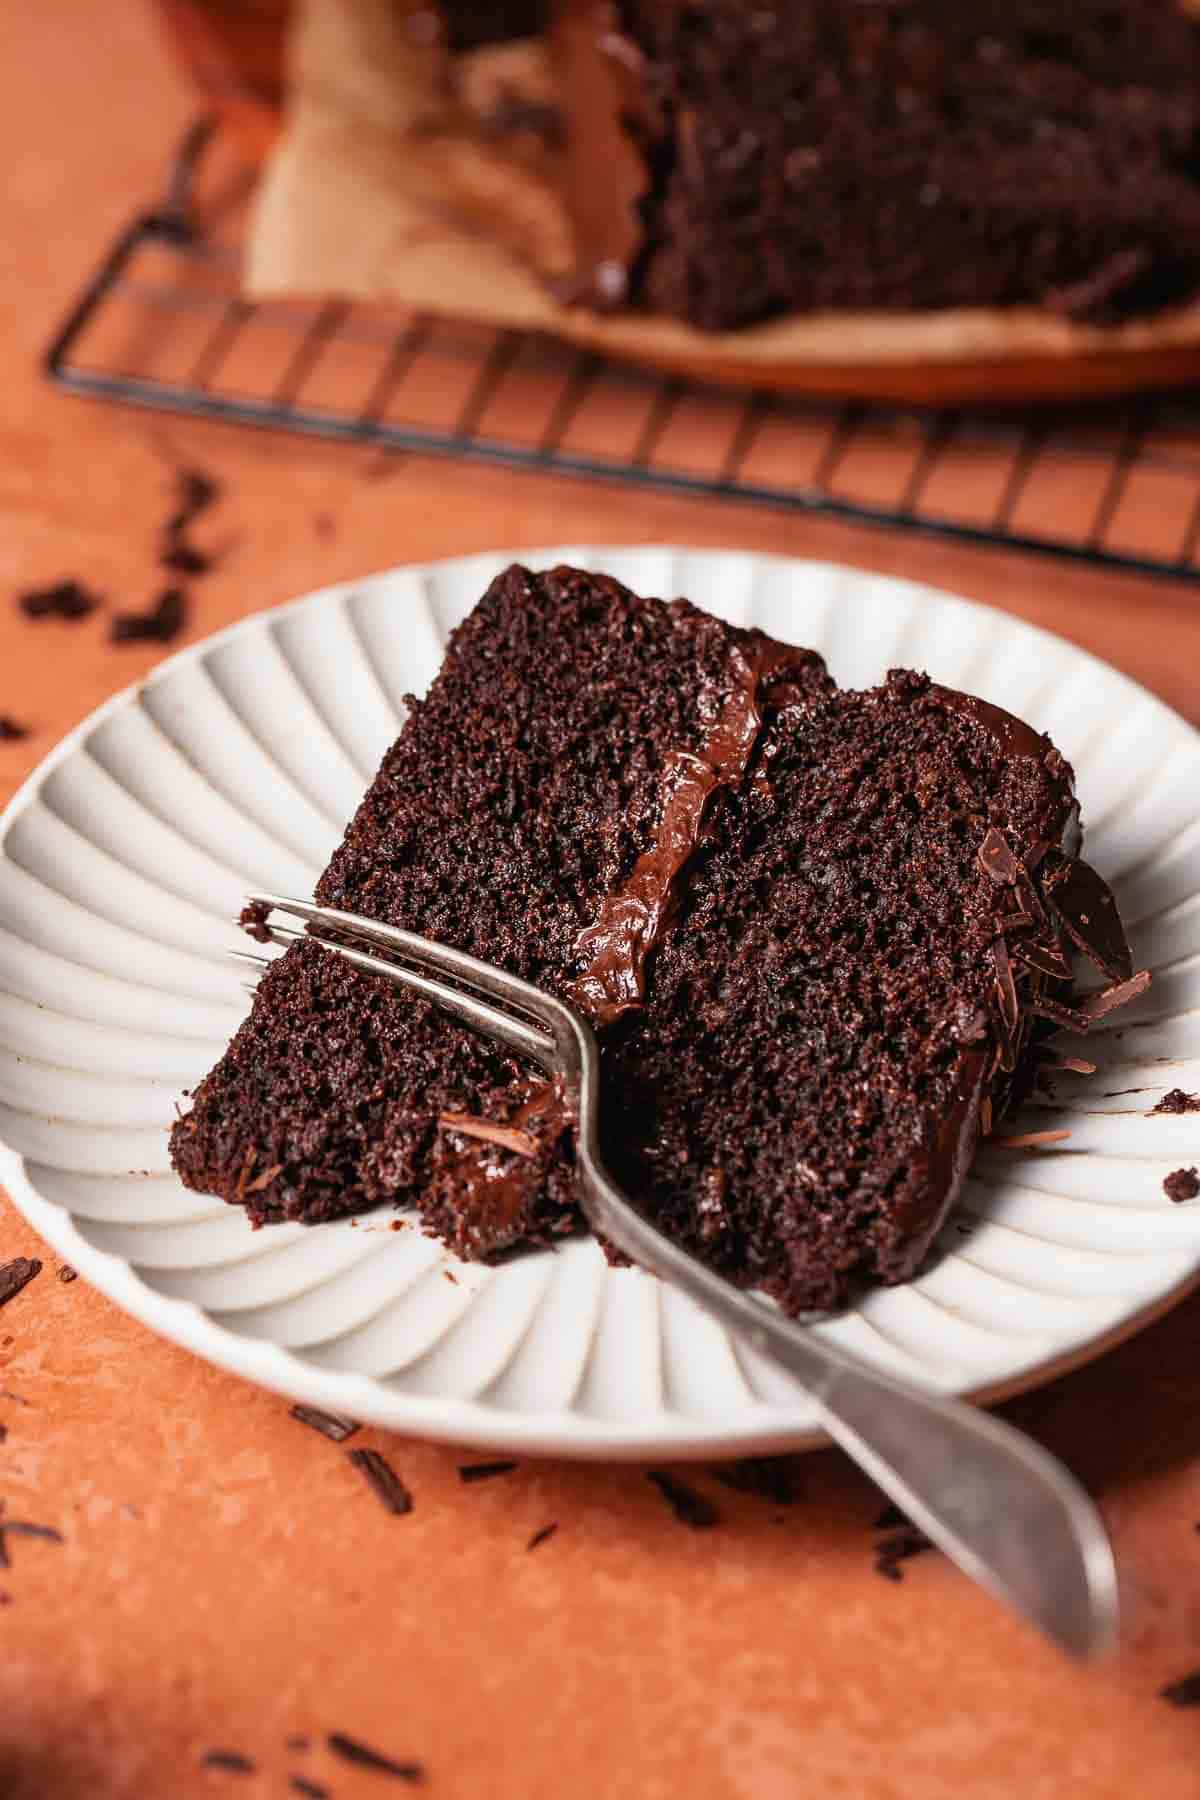 A slice of moist chocolate cake with chocolate frosting on a white plate with a fork digging into it.